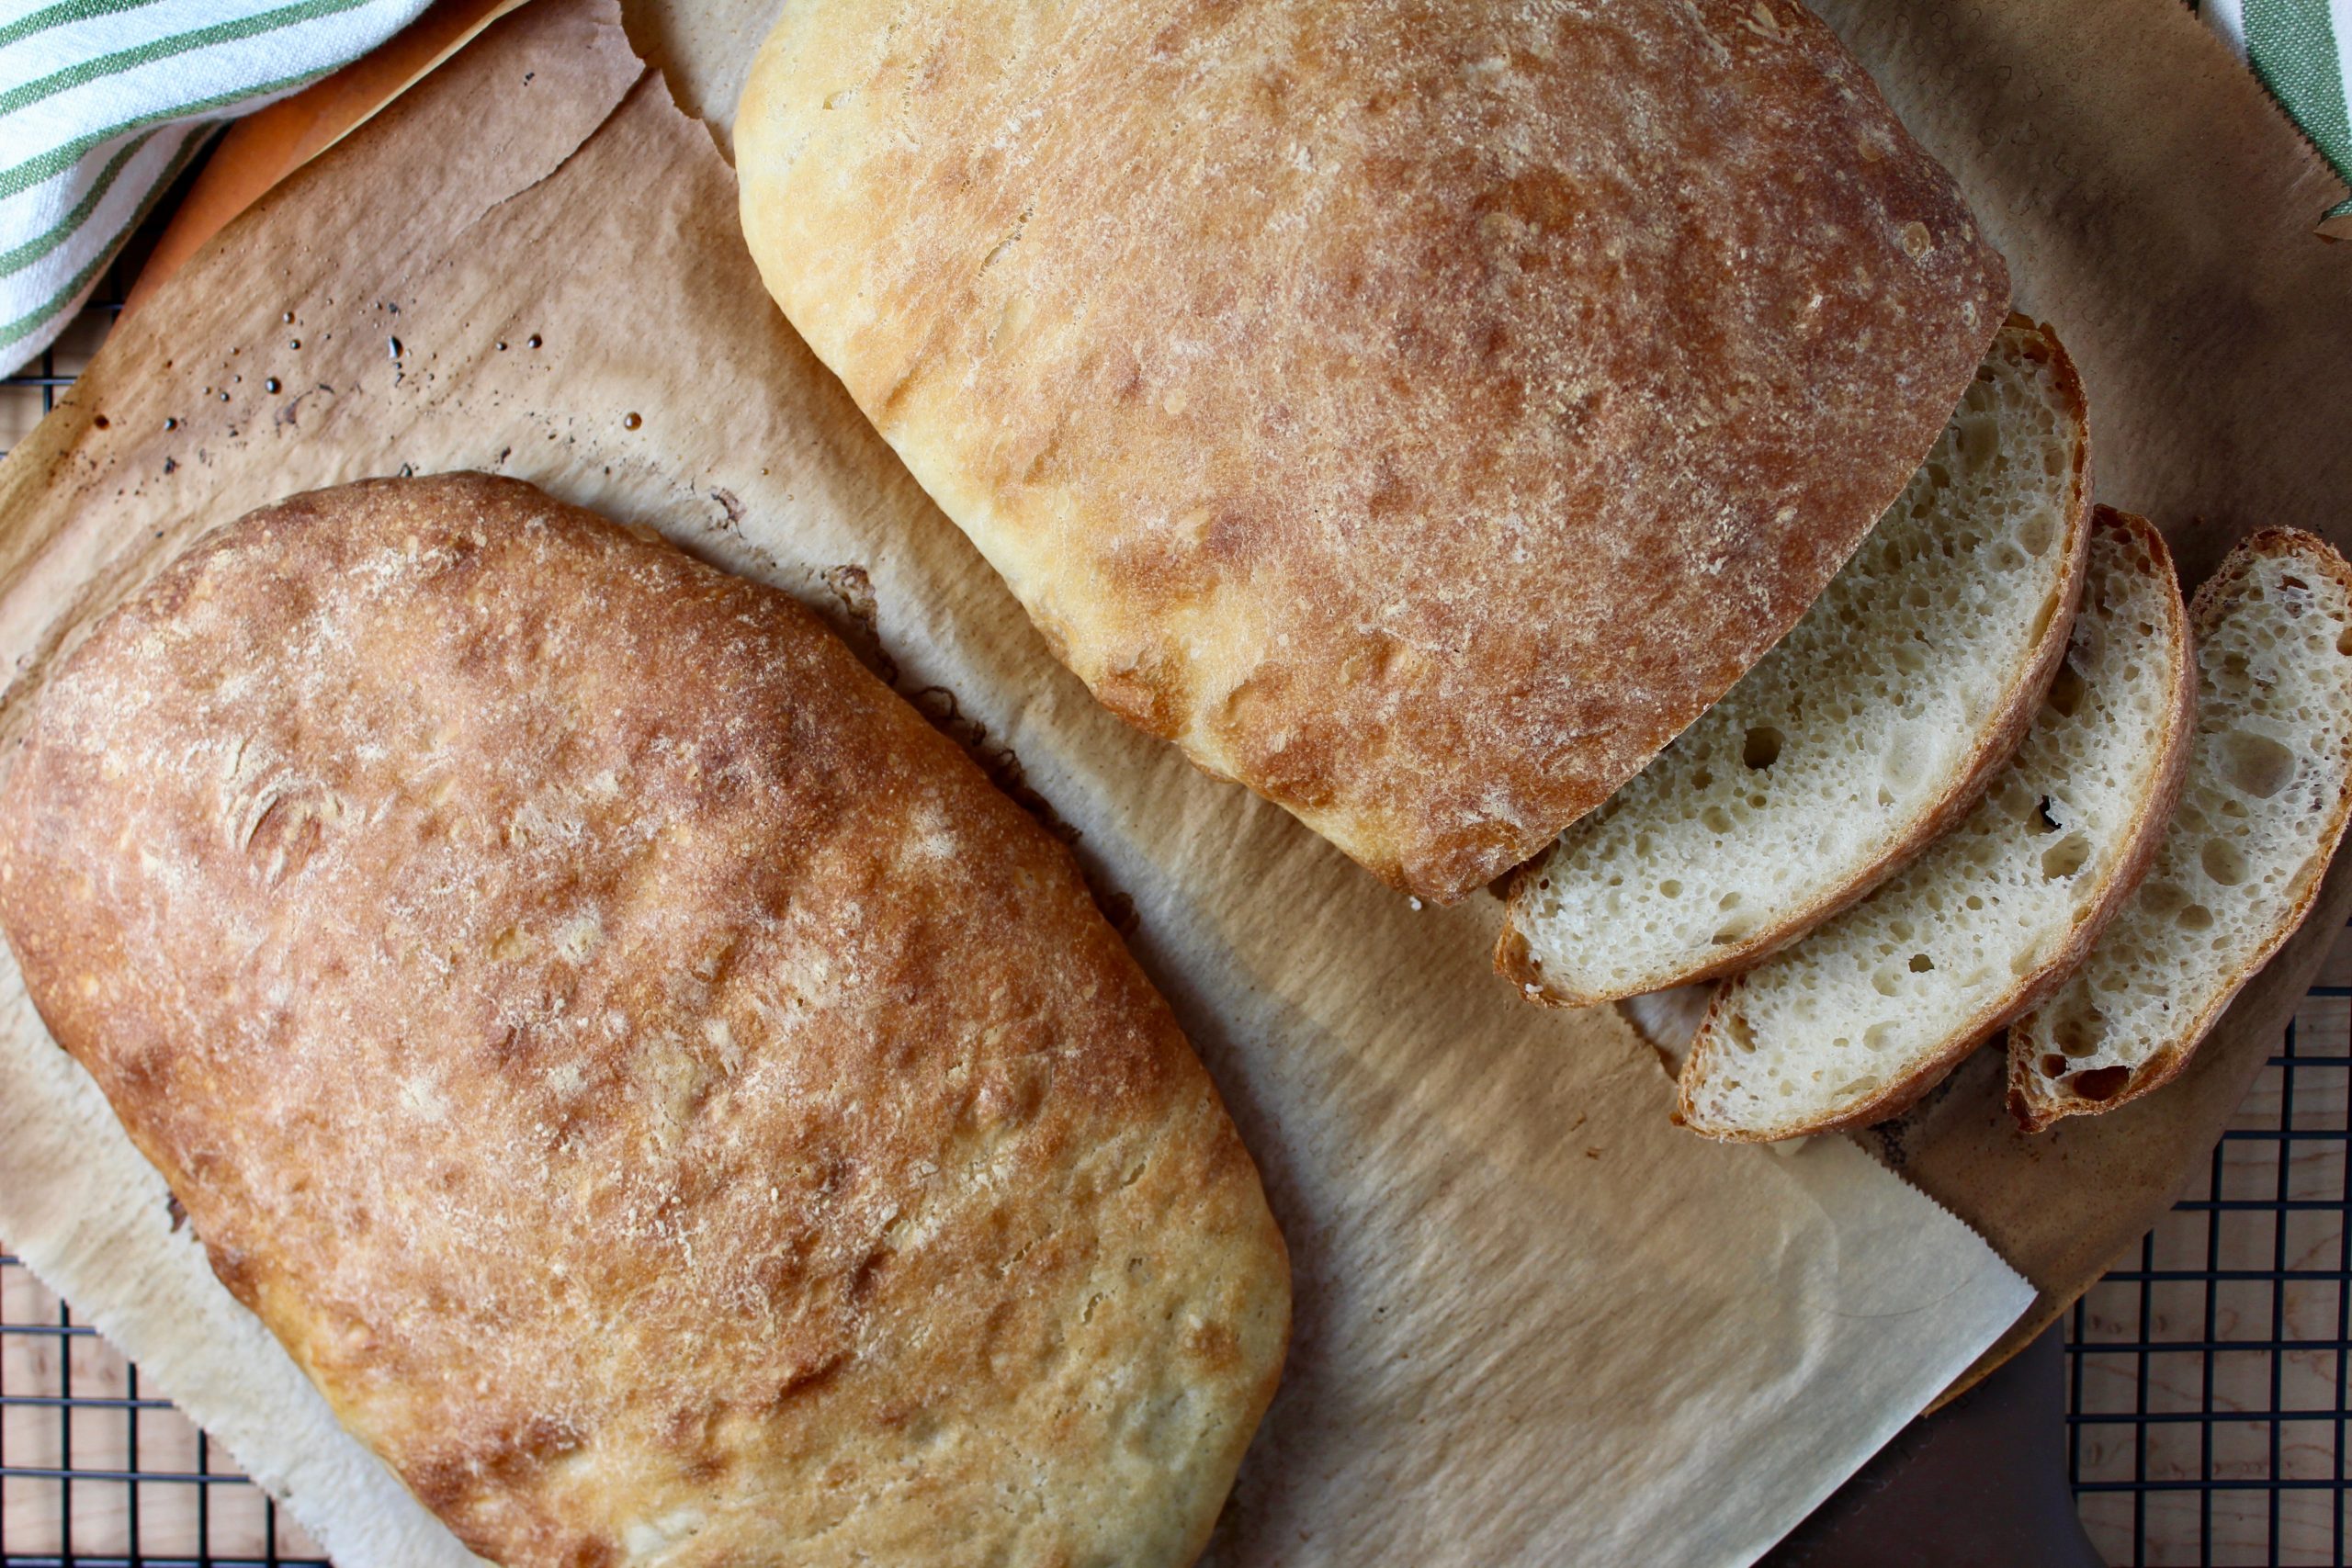 https://www.epicuricloud.com/wp-content/uploads/2020/04/Ciabatta-Bread-2-loaves-w-slices-scaled.jpg